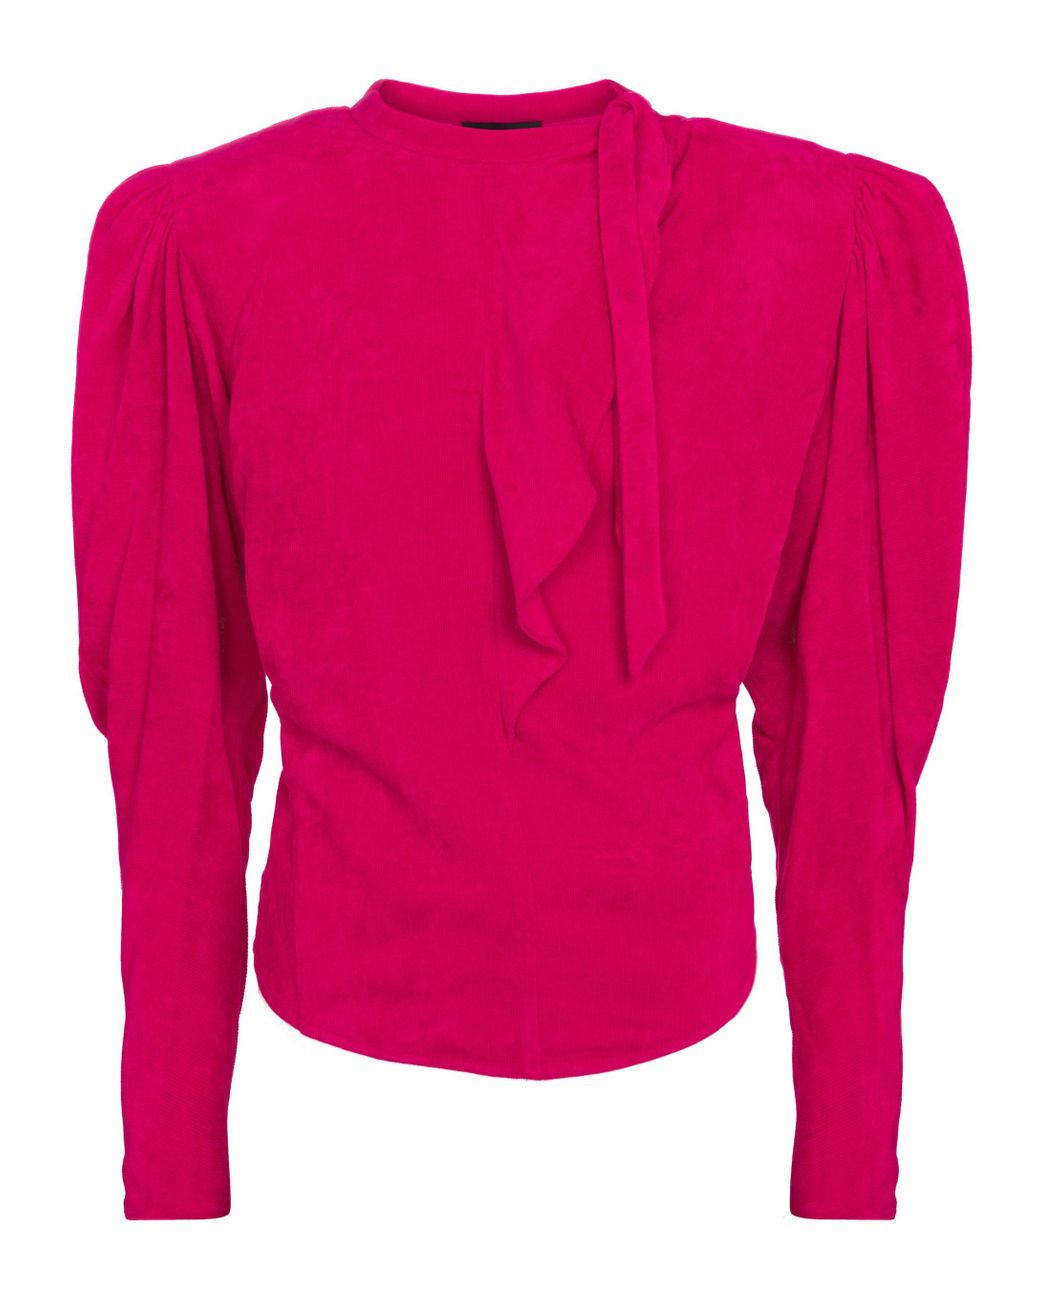 Isabel Marant Valeria Blouse in Pink - Lyst